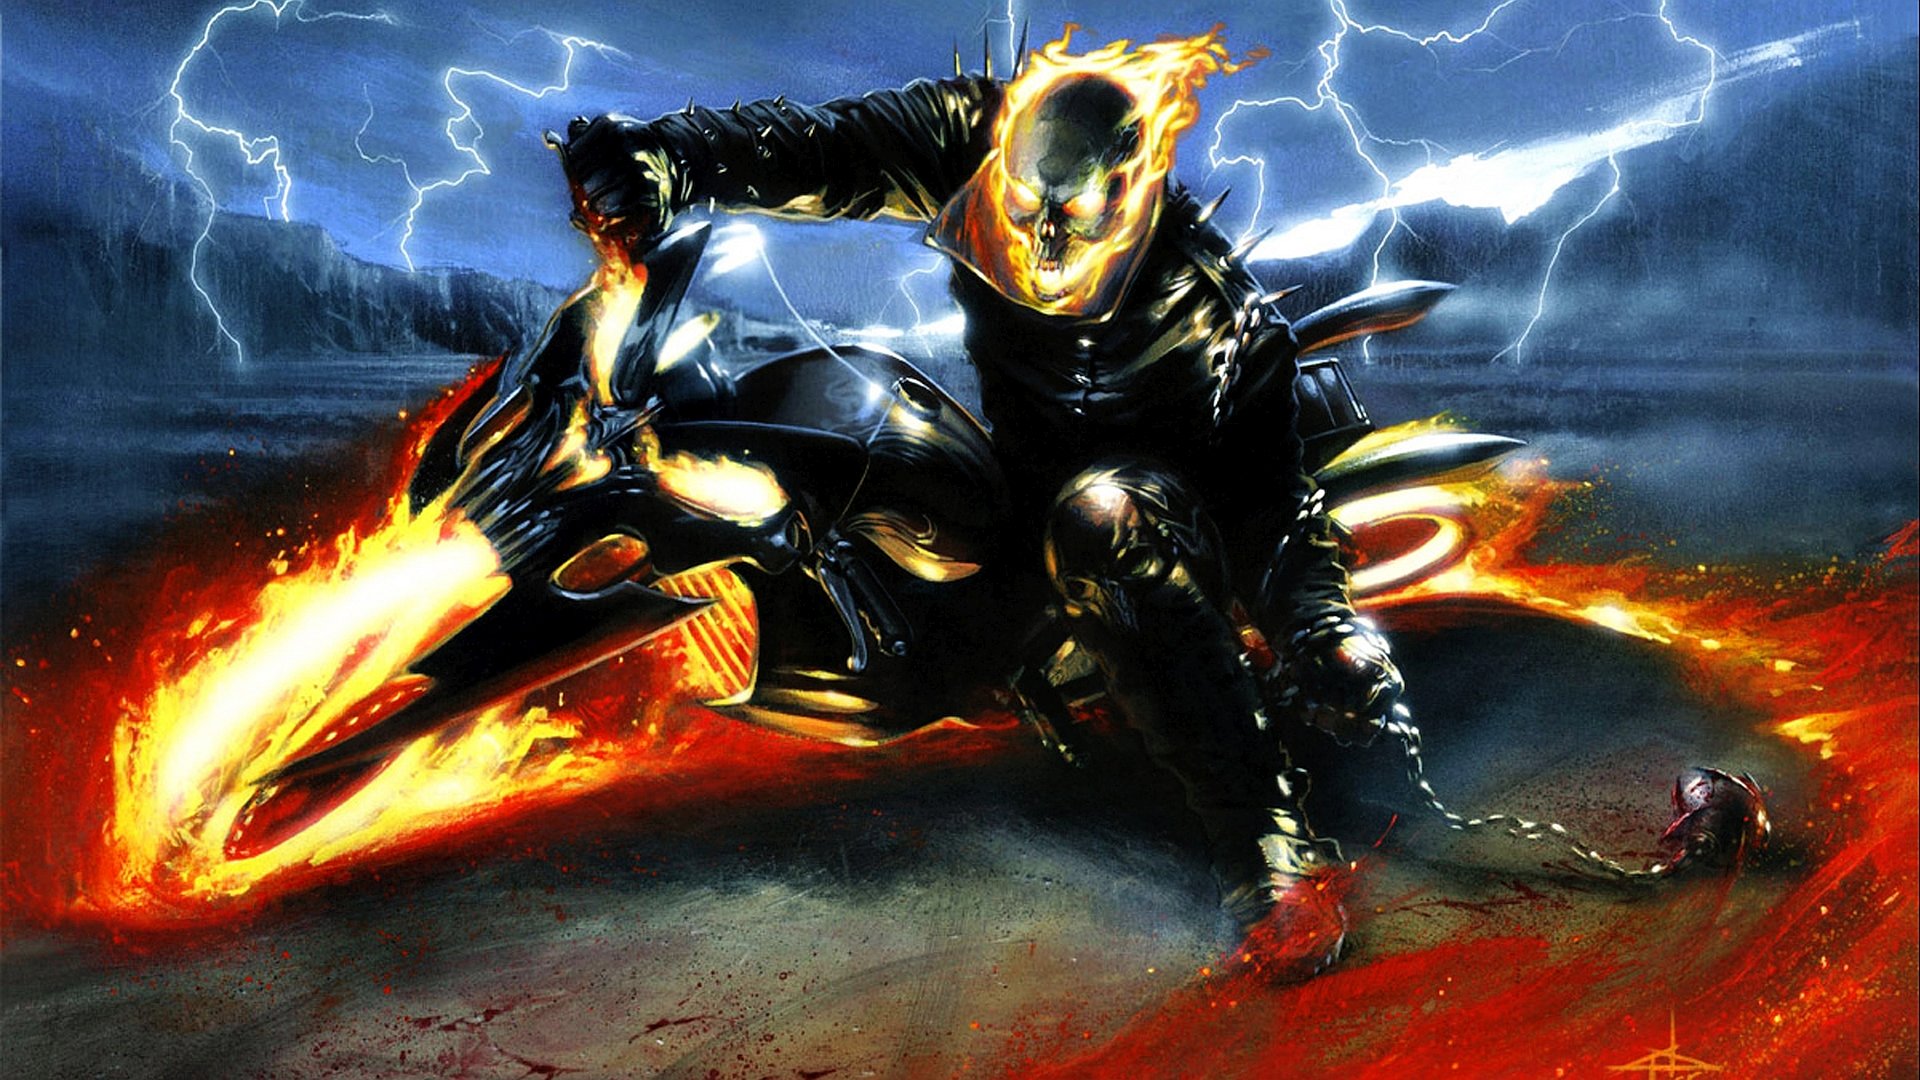 Ghost Rider Wallpapers 1920x1080 Full Hd 1080p Desktop Backgrounds